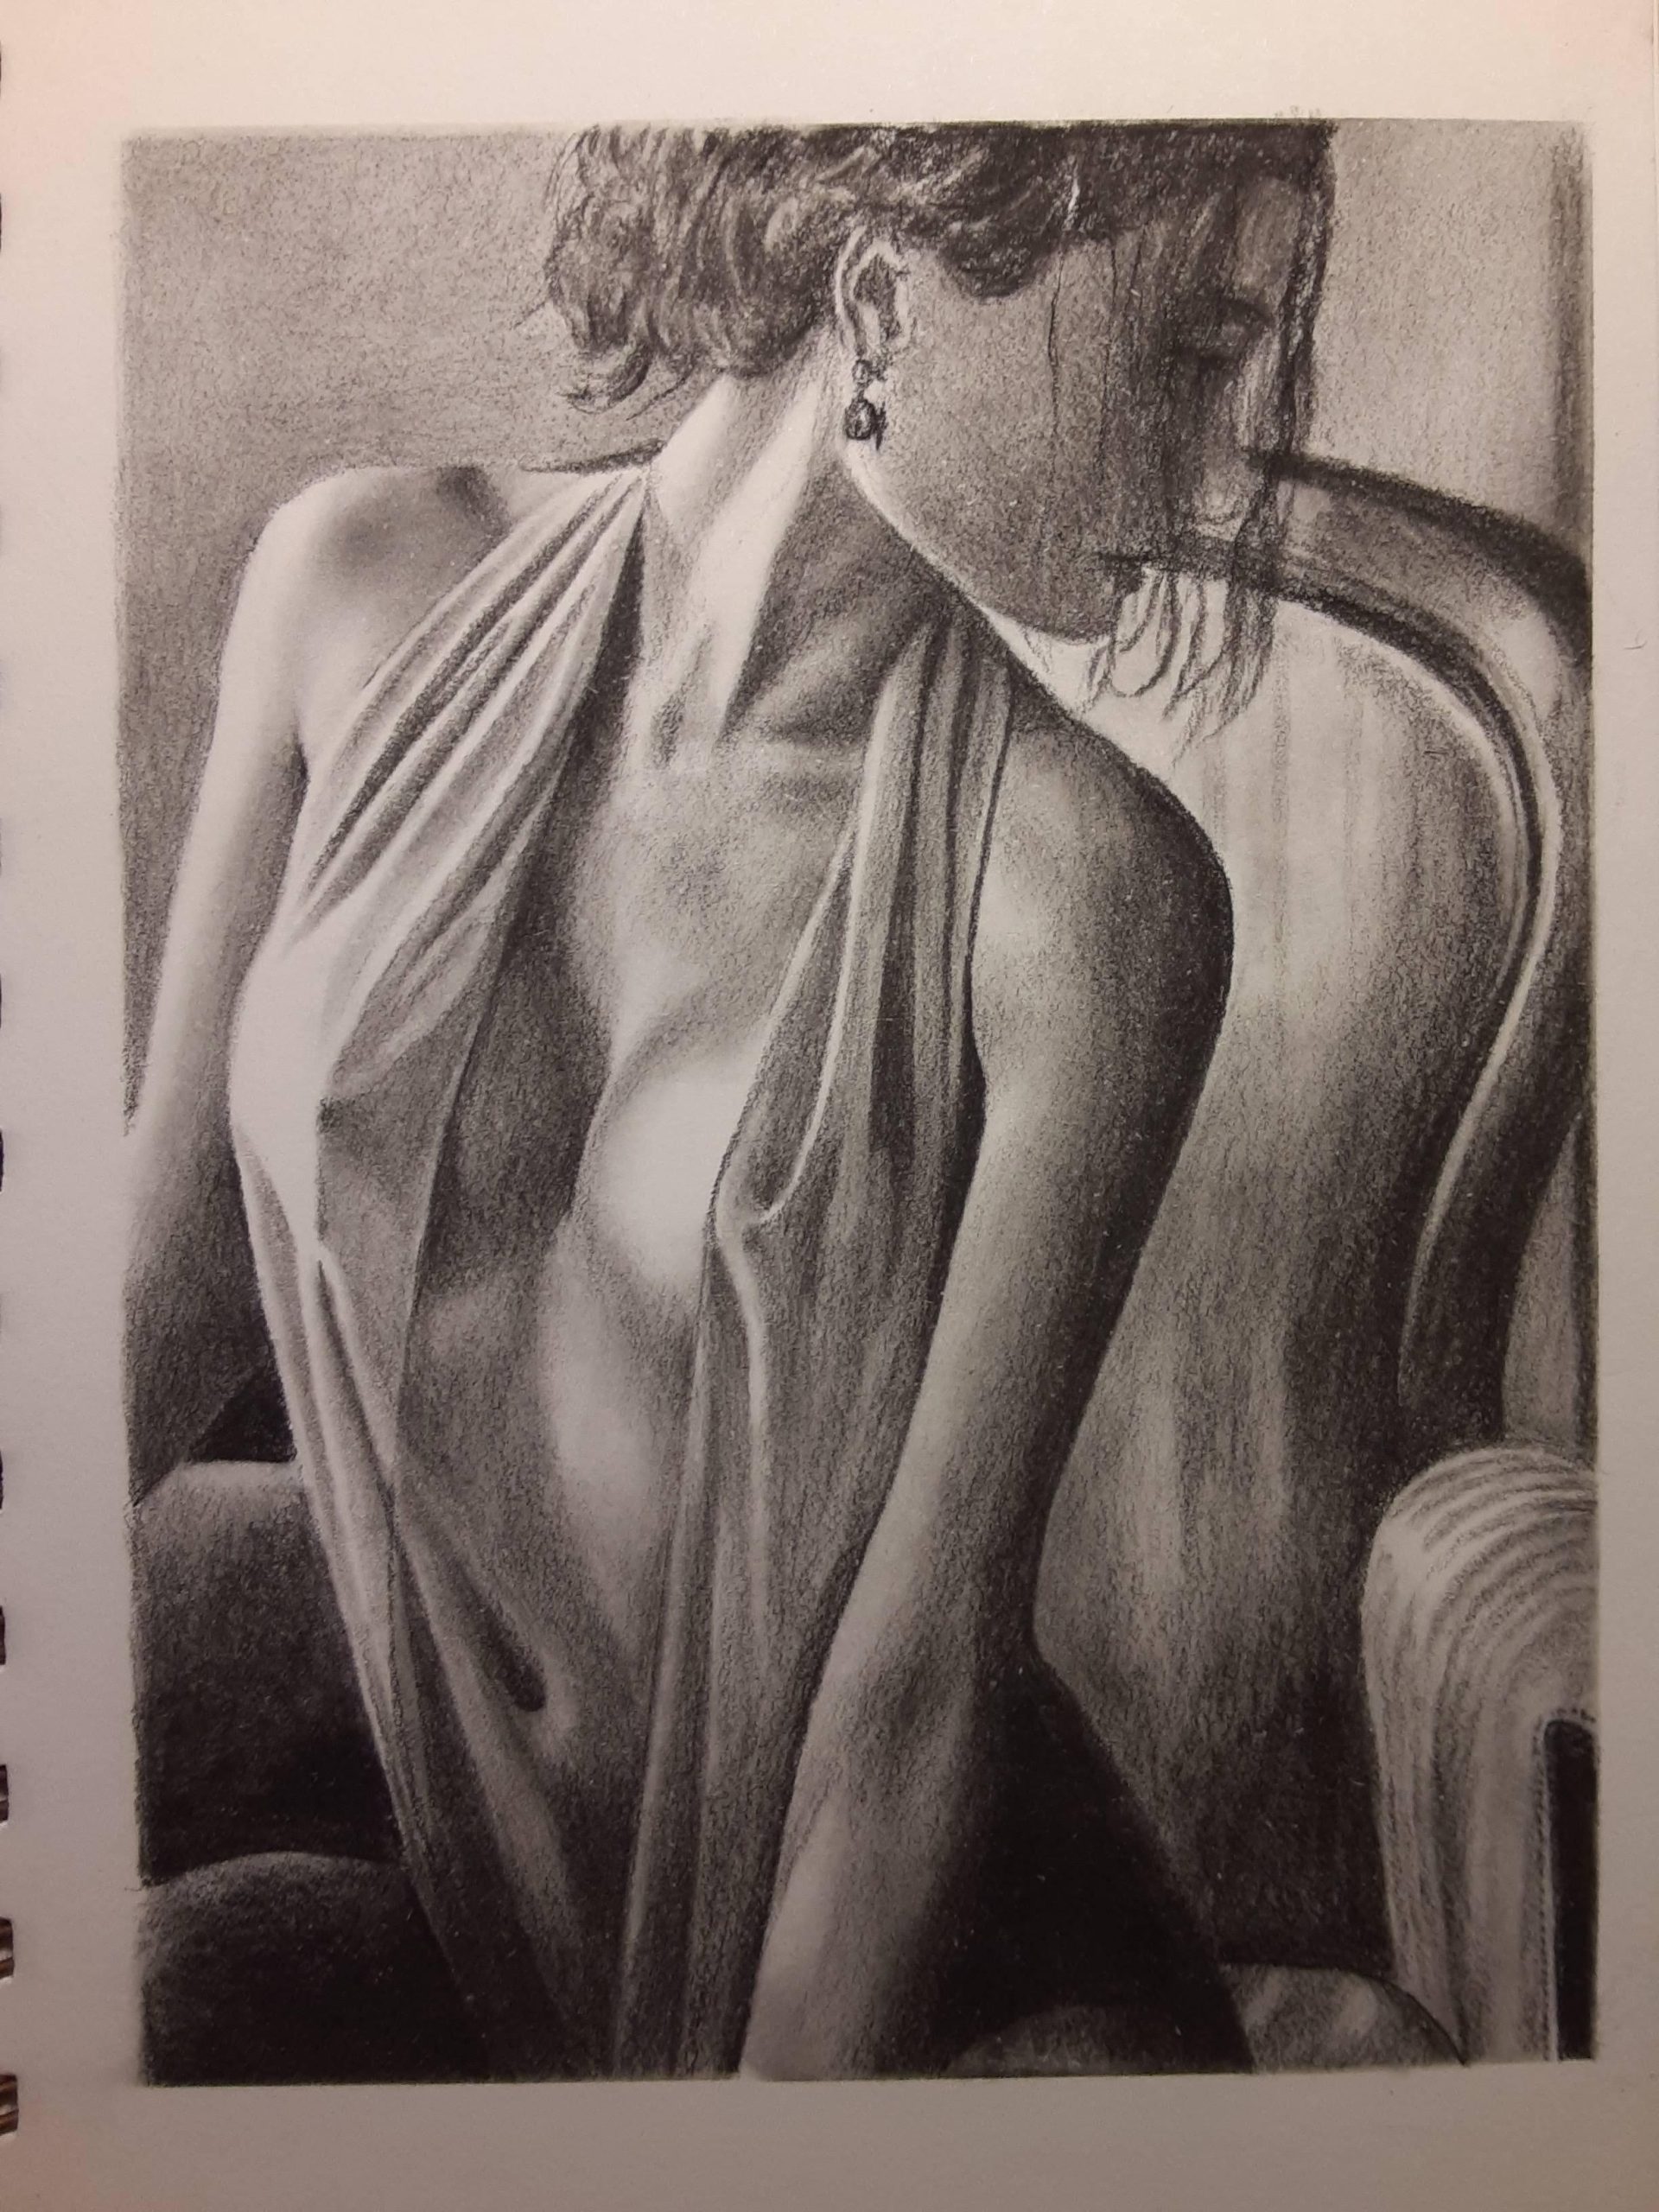 Charcoal of a diaphanously clad girl